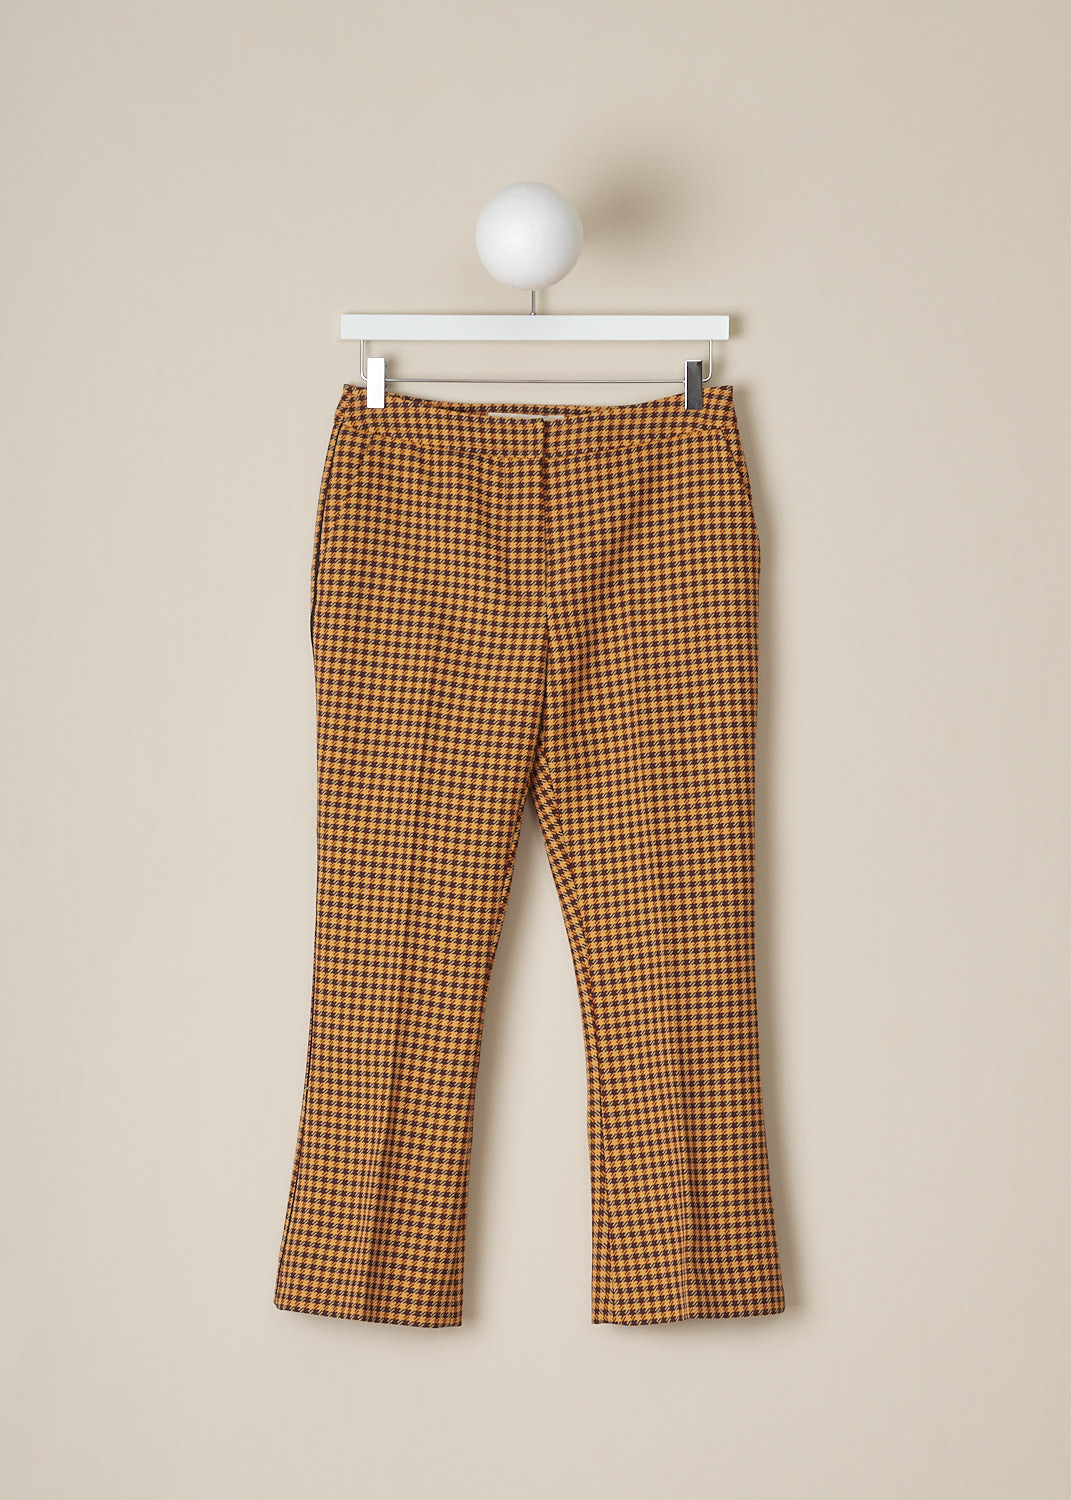 MARNI, ORANGE HOUNDSTOOTH PANTS, PAMA0341IM_UTP730_CHR79, Orange, Print, Front, These mid-rise orange Houndstooth pants has a narrow waistband and a concealed clasp and zip closure. These pants have slanted pockets in the front and welt pockets in the back. Black piping runs along the side seams and centre creases run along the length of the pant legs. 
